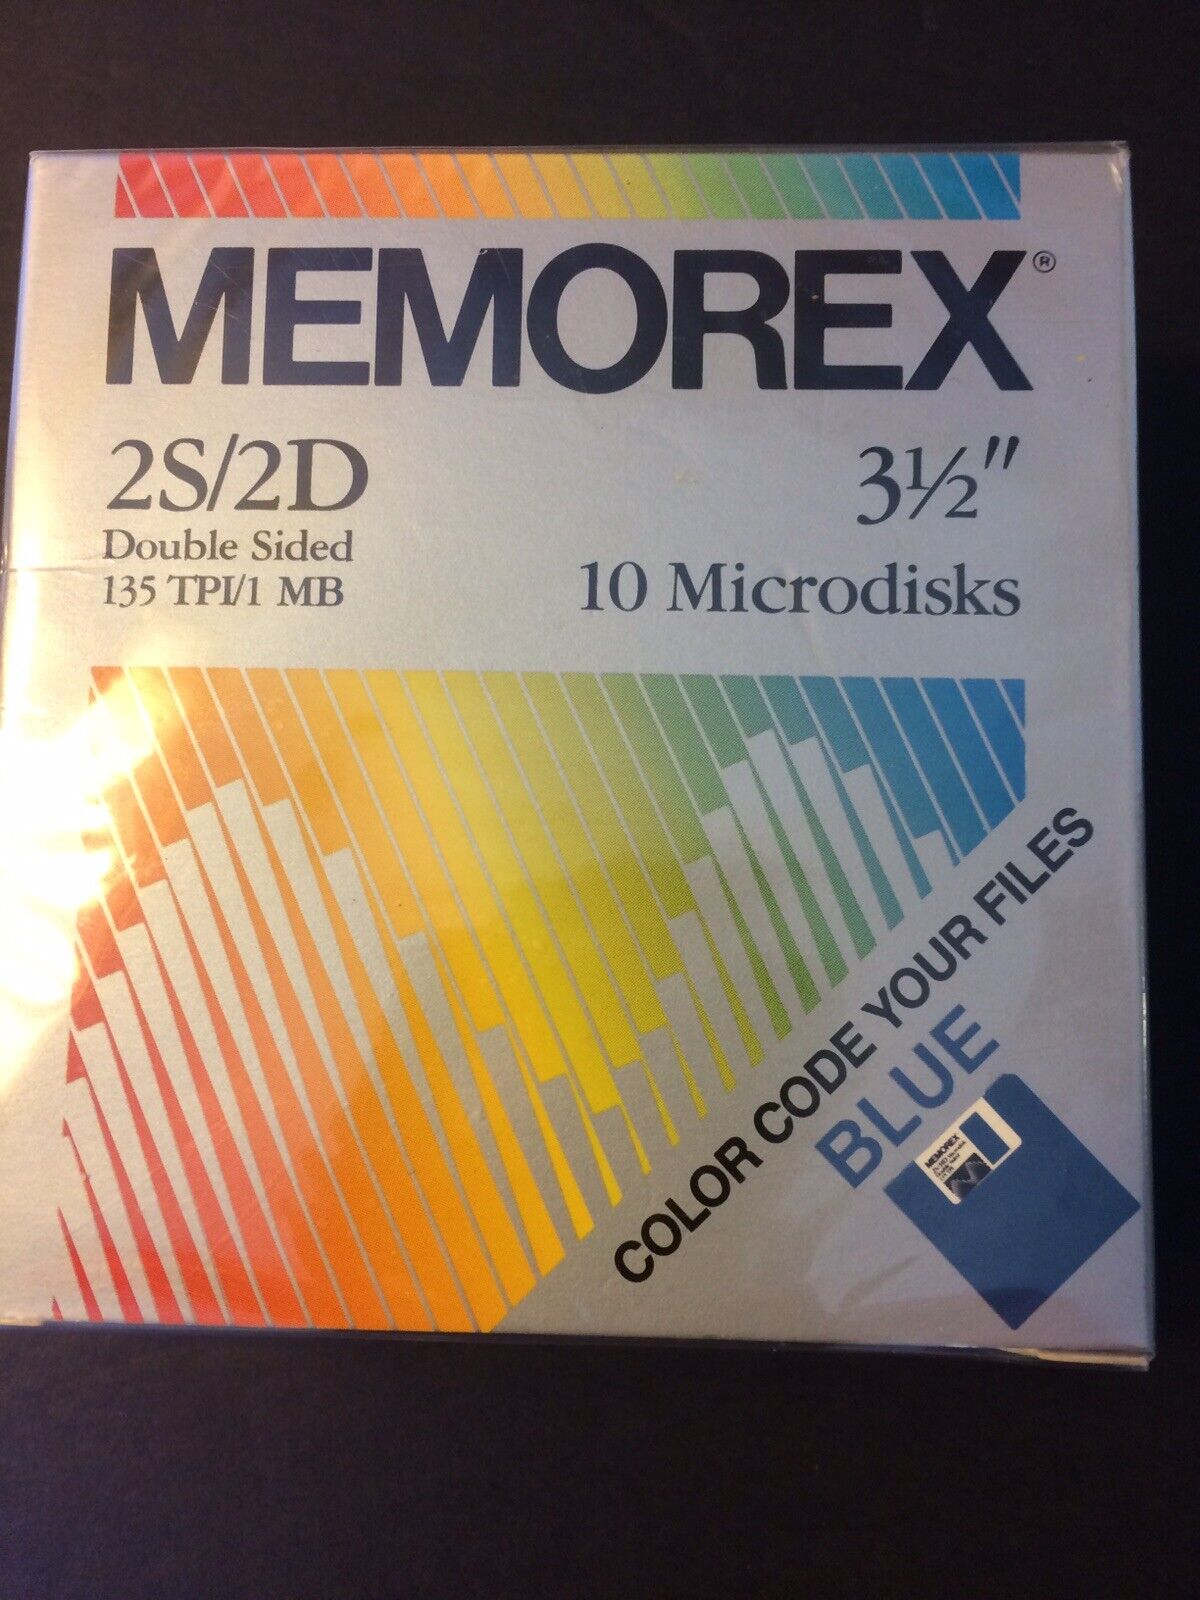 10 Blue Memorex 2S/2D - 31/2” Microdiscks, Double Sided, New Factory Sealed.